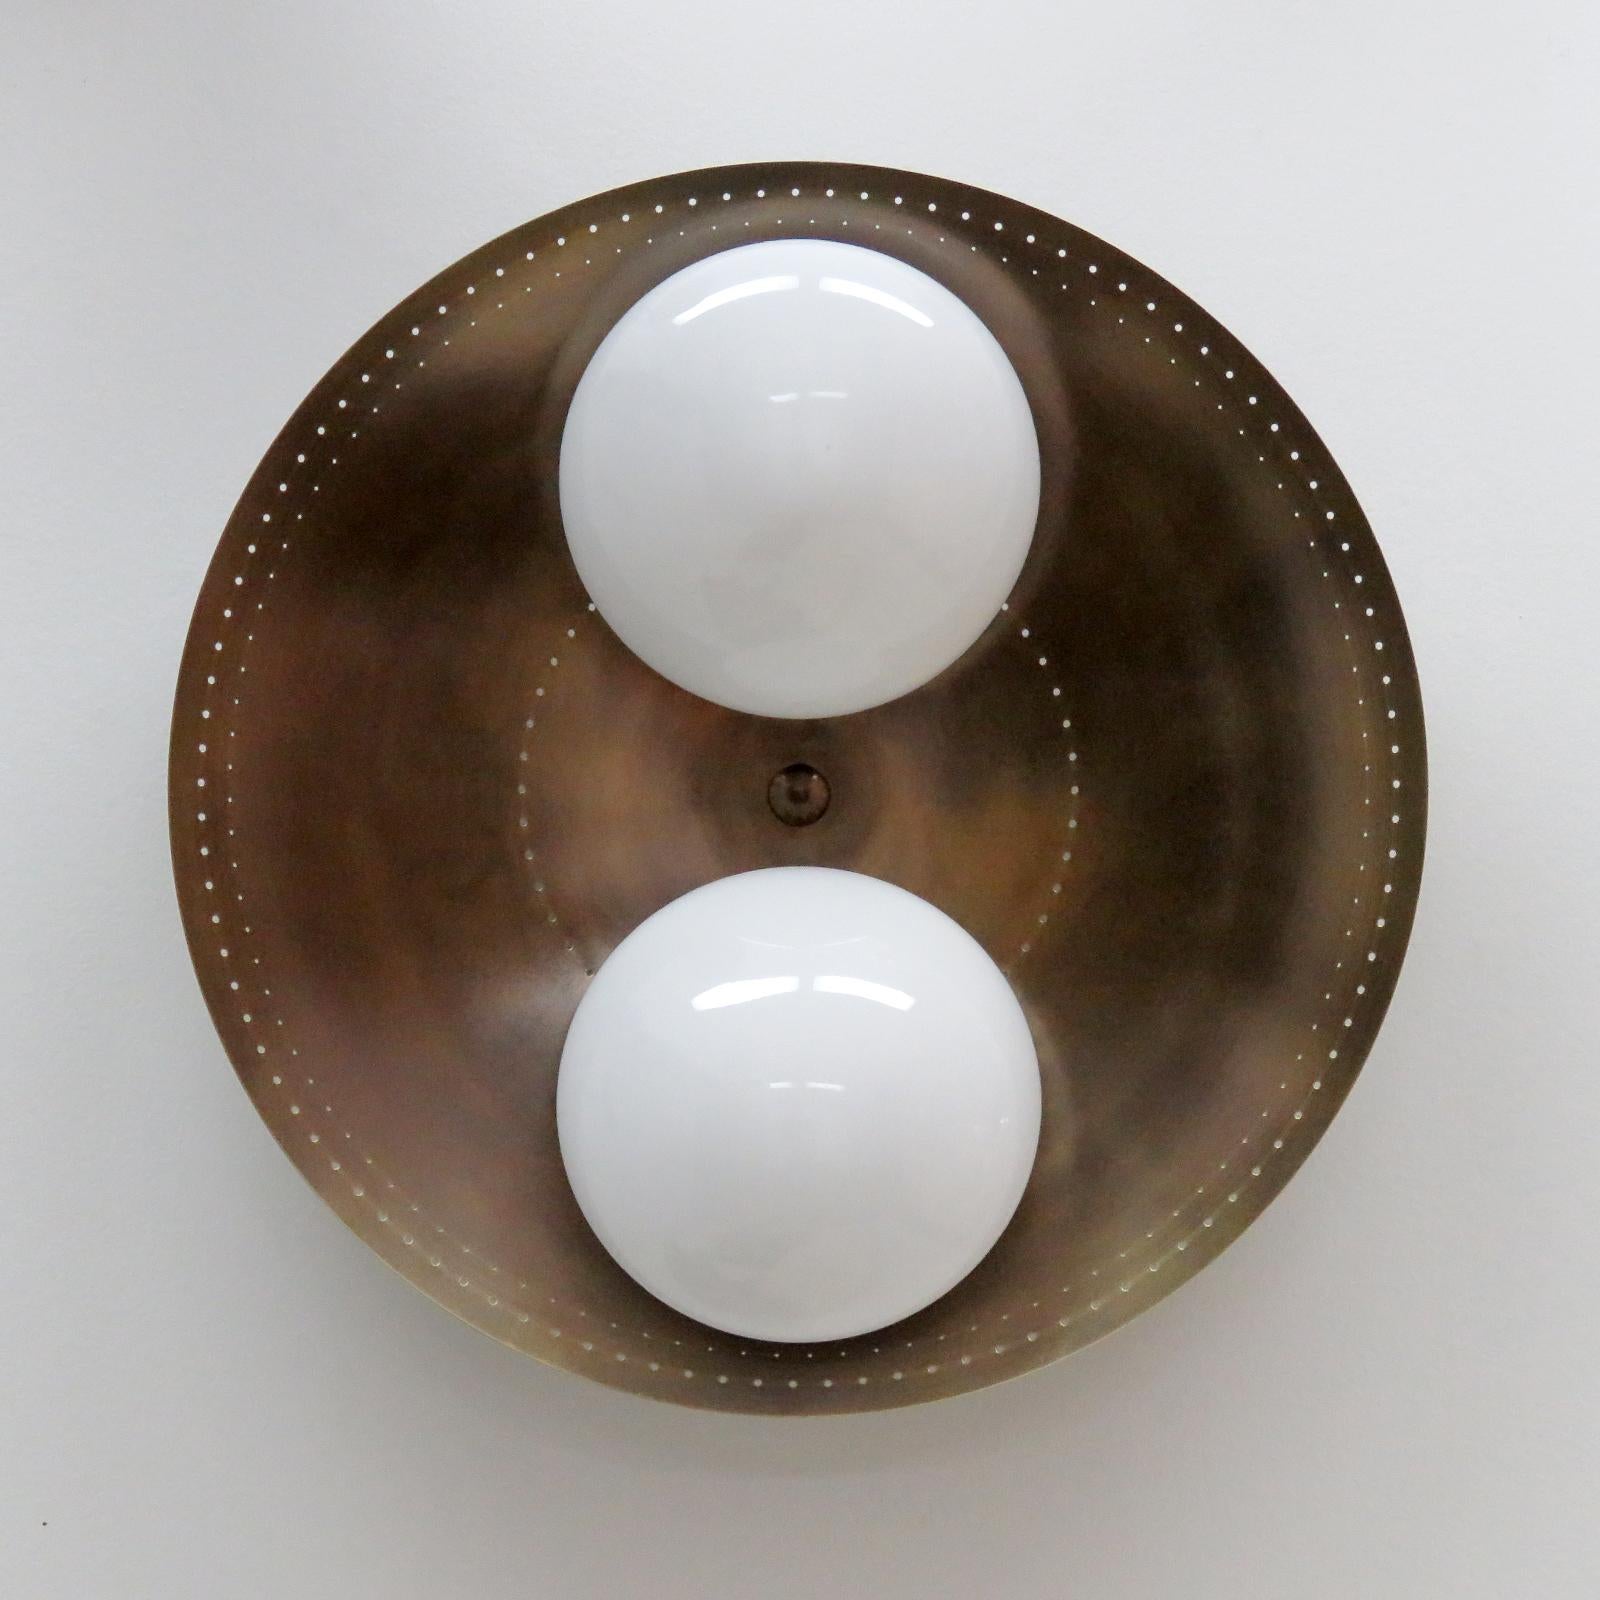 Elegant Binova-24 wall or ceiling light designed by Gallery L7, handcrafted and finished in Los Angeles from American brass, with two opaline glass shades on an aged raw brass disc. Two E26 sockets per fixture, max. wattage 60w each, wired for US